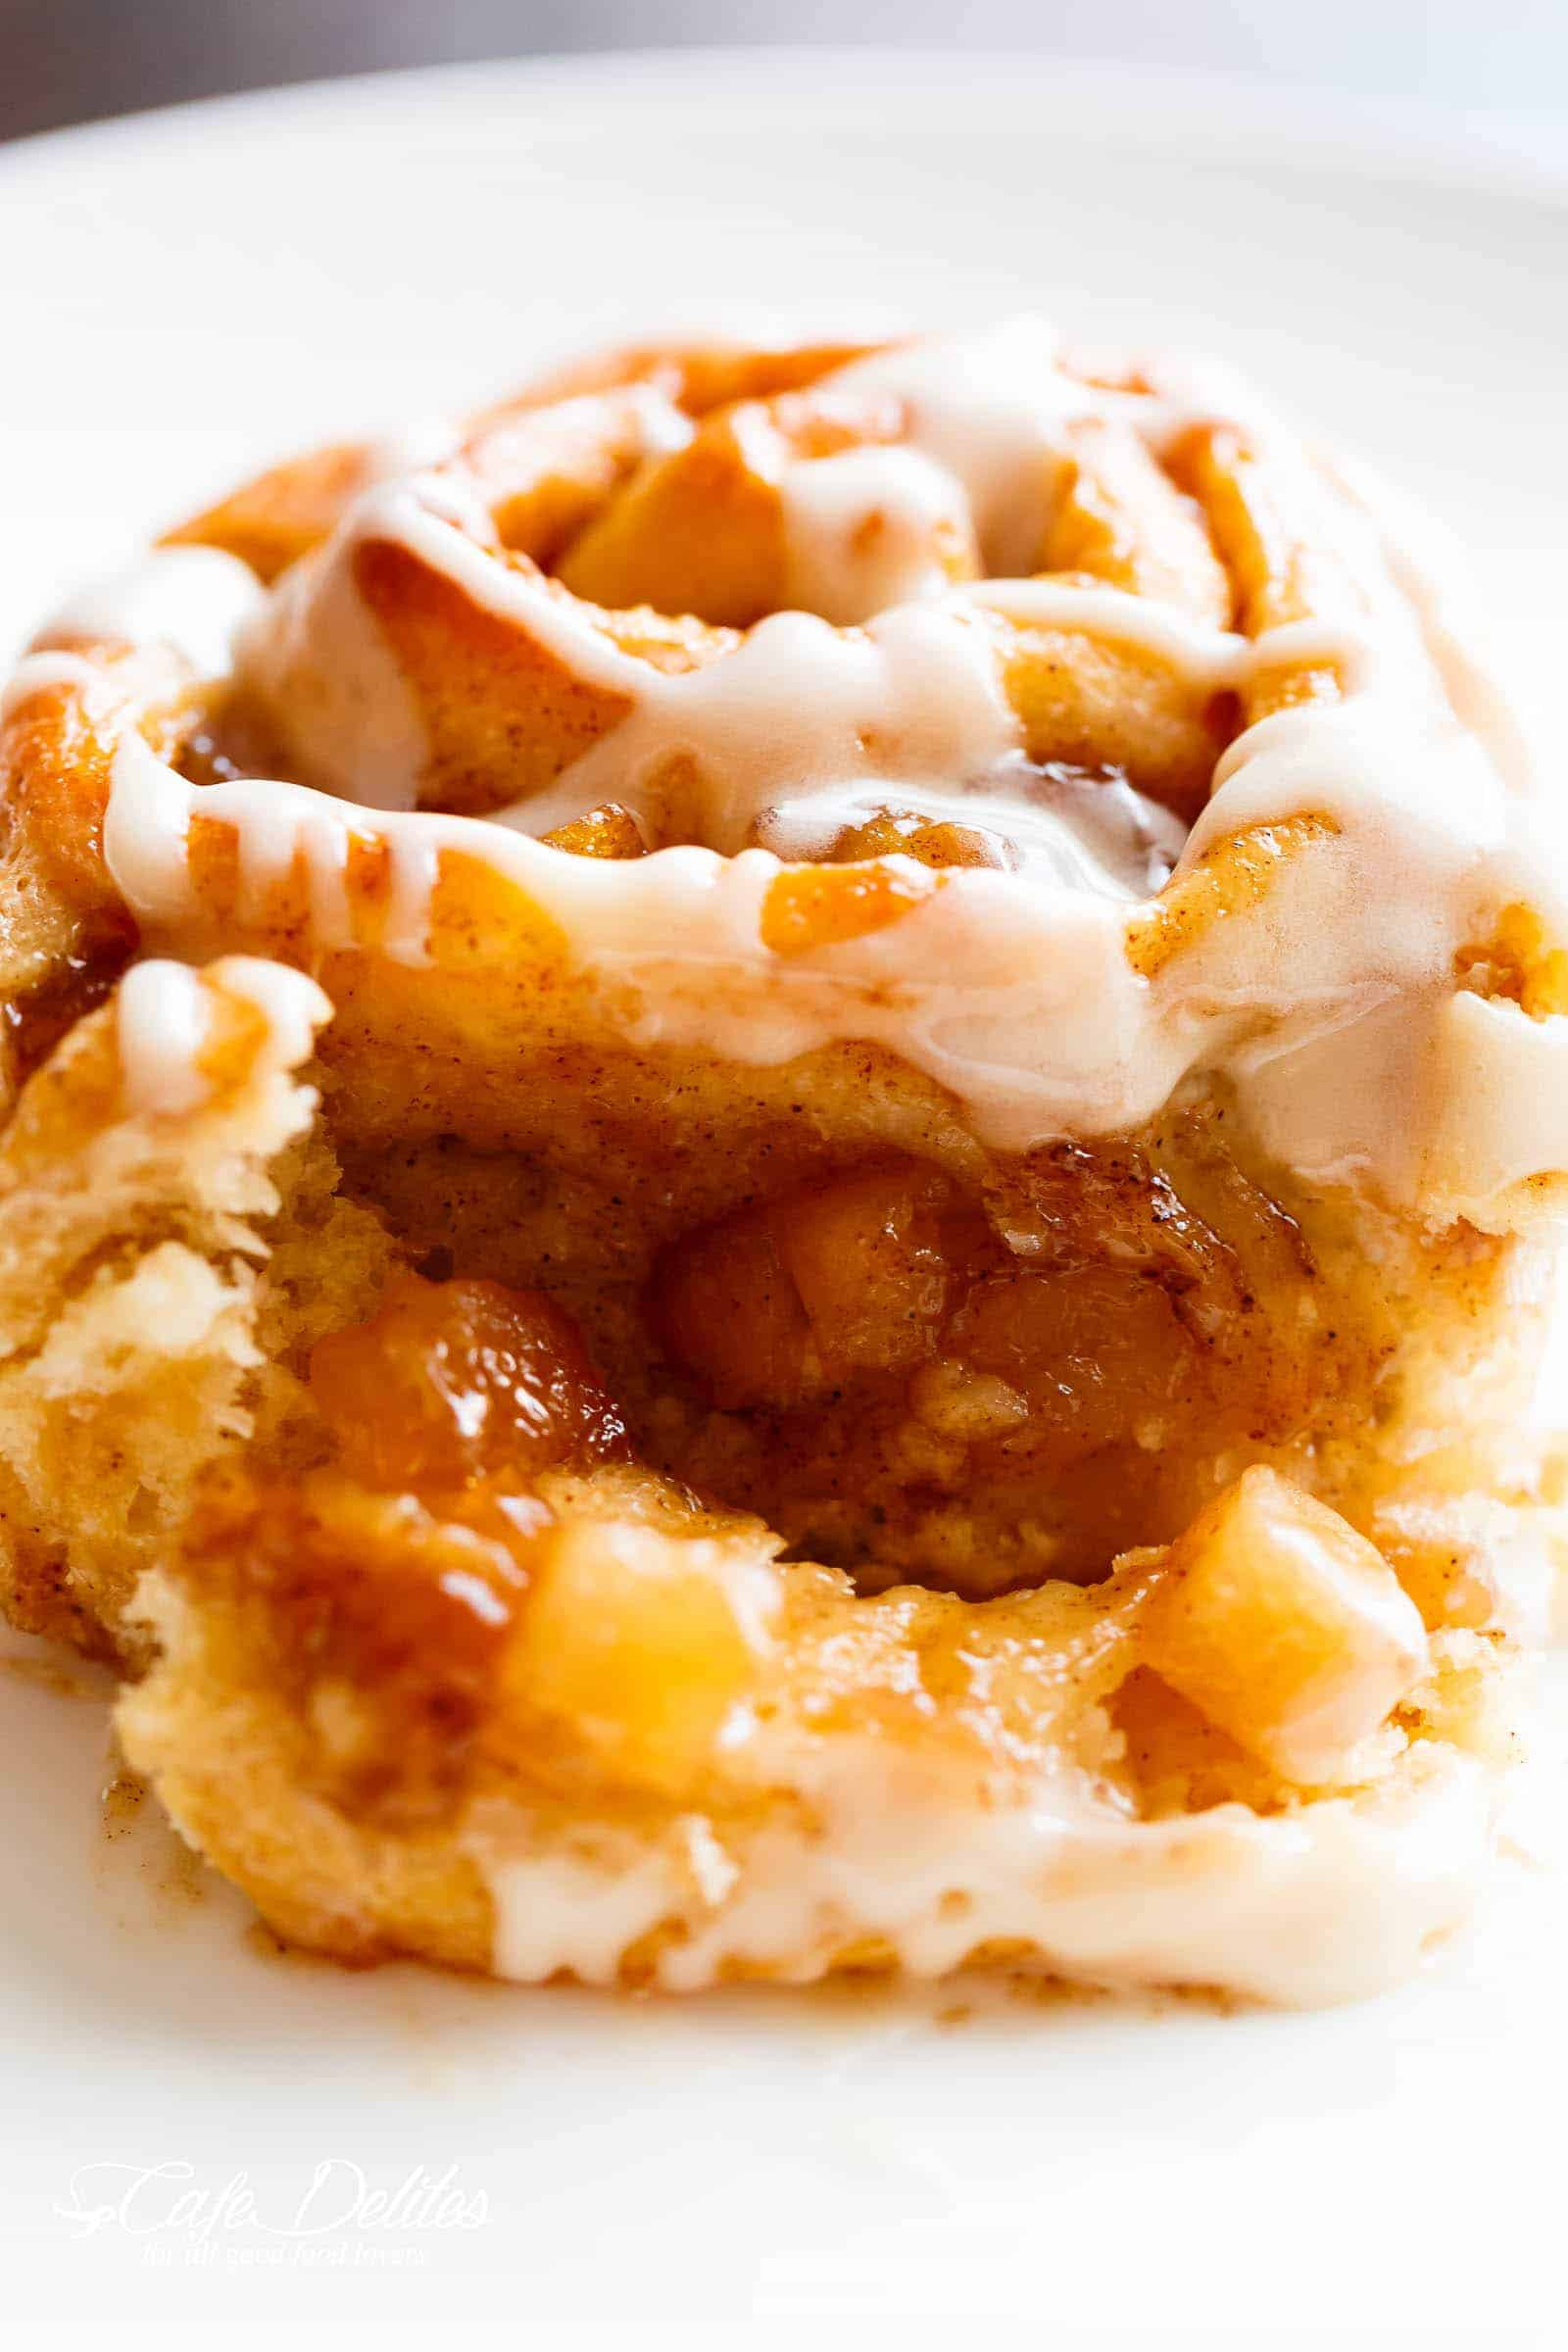 Apple Pie with Cinnamon Rolls New Apple Pie Cinnamon Rolls with Cream Cheese Frosting Cafe